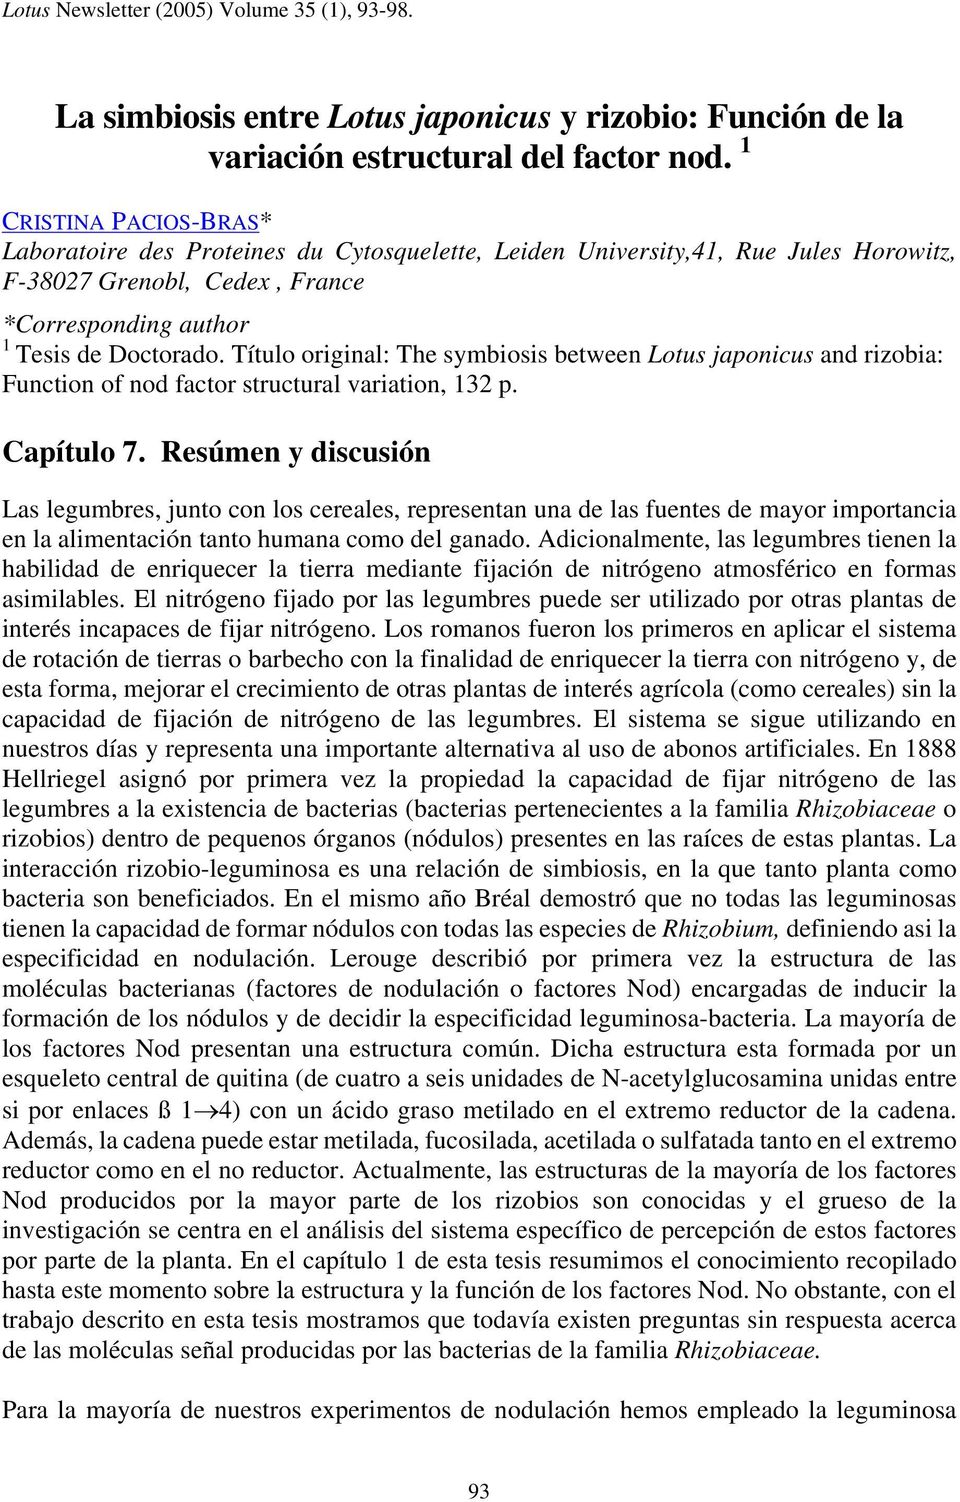 Título original: The symbiosis between Lotus japonicus and rizobia: Function of nod factor structural variation, 132 p. Capítulo 7.